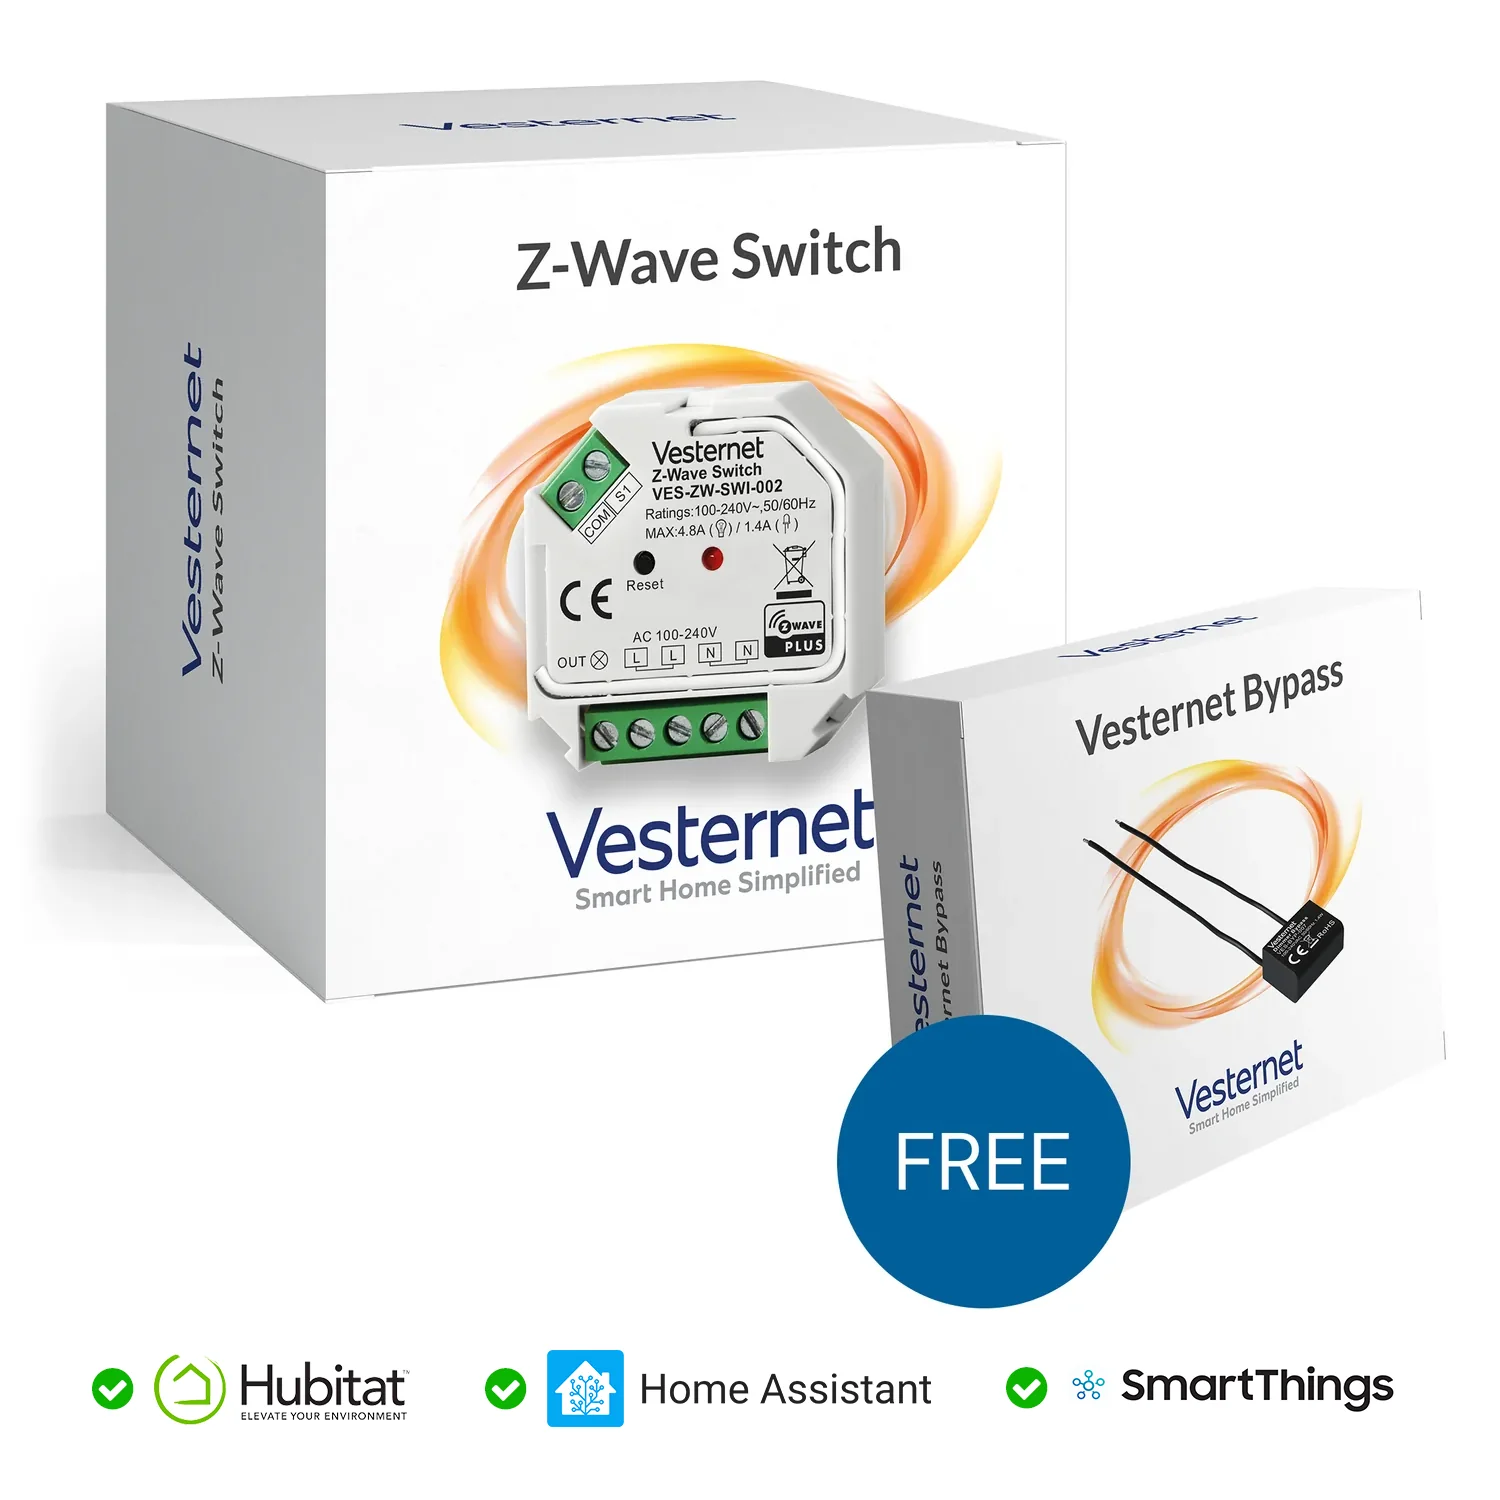 Vesternet Z-Wave Switch Questions & Answers